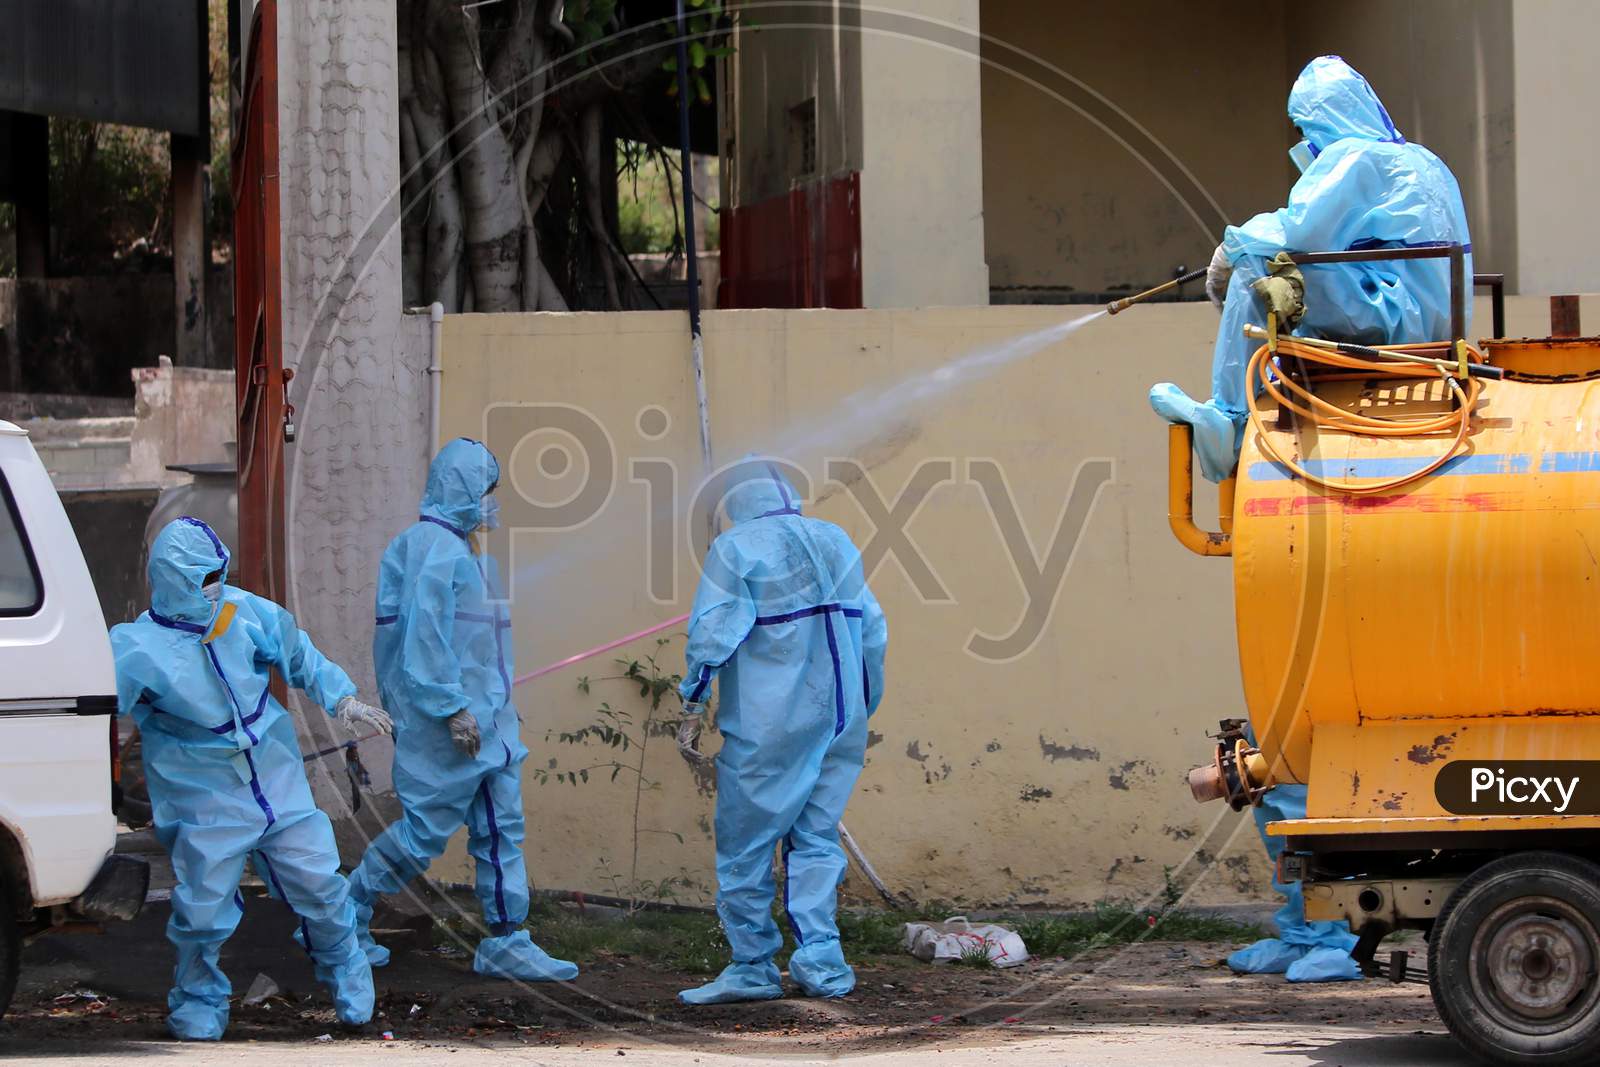 A municipal worker sprays disinfectant on his colleagues after they cremated a person who died of Covid-19 at a crematorium in Ajmer, Rajasthan on July 2, 2020.